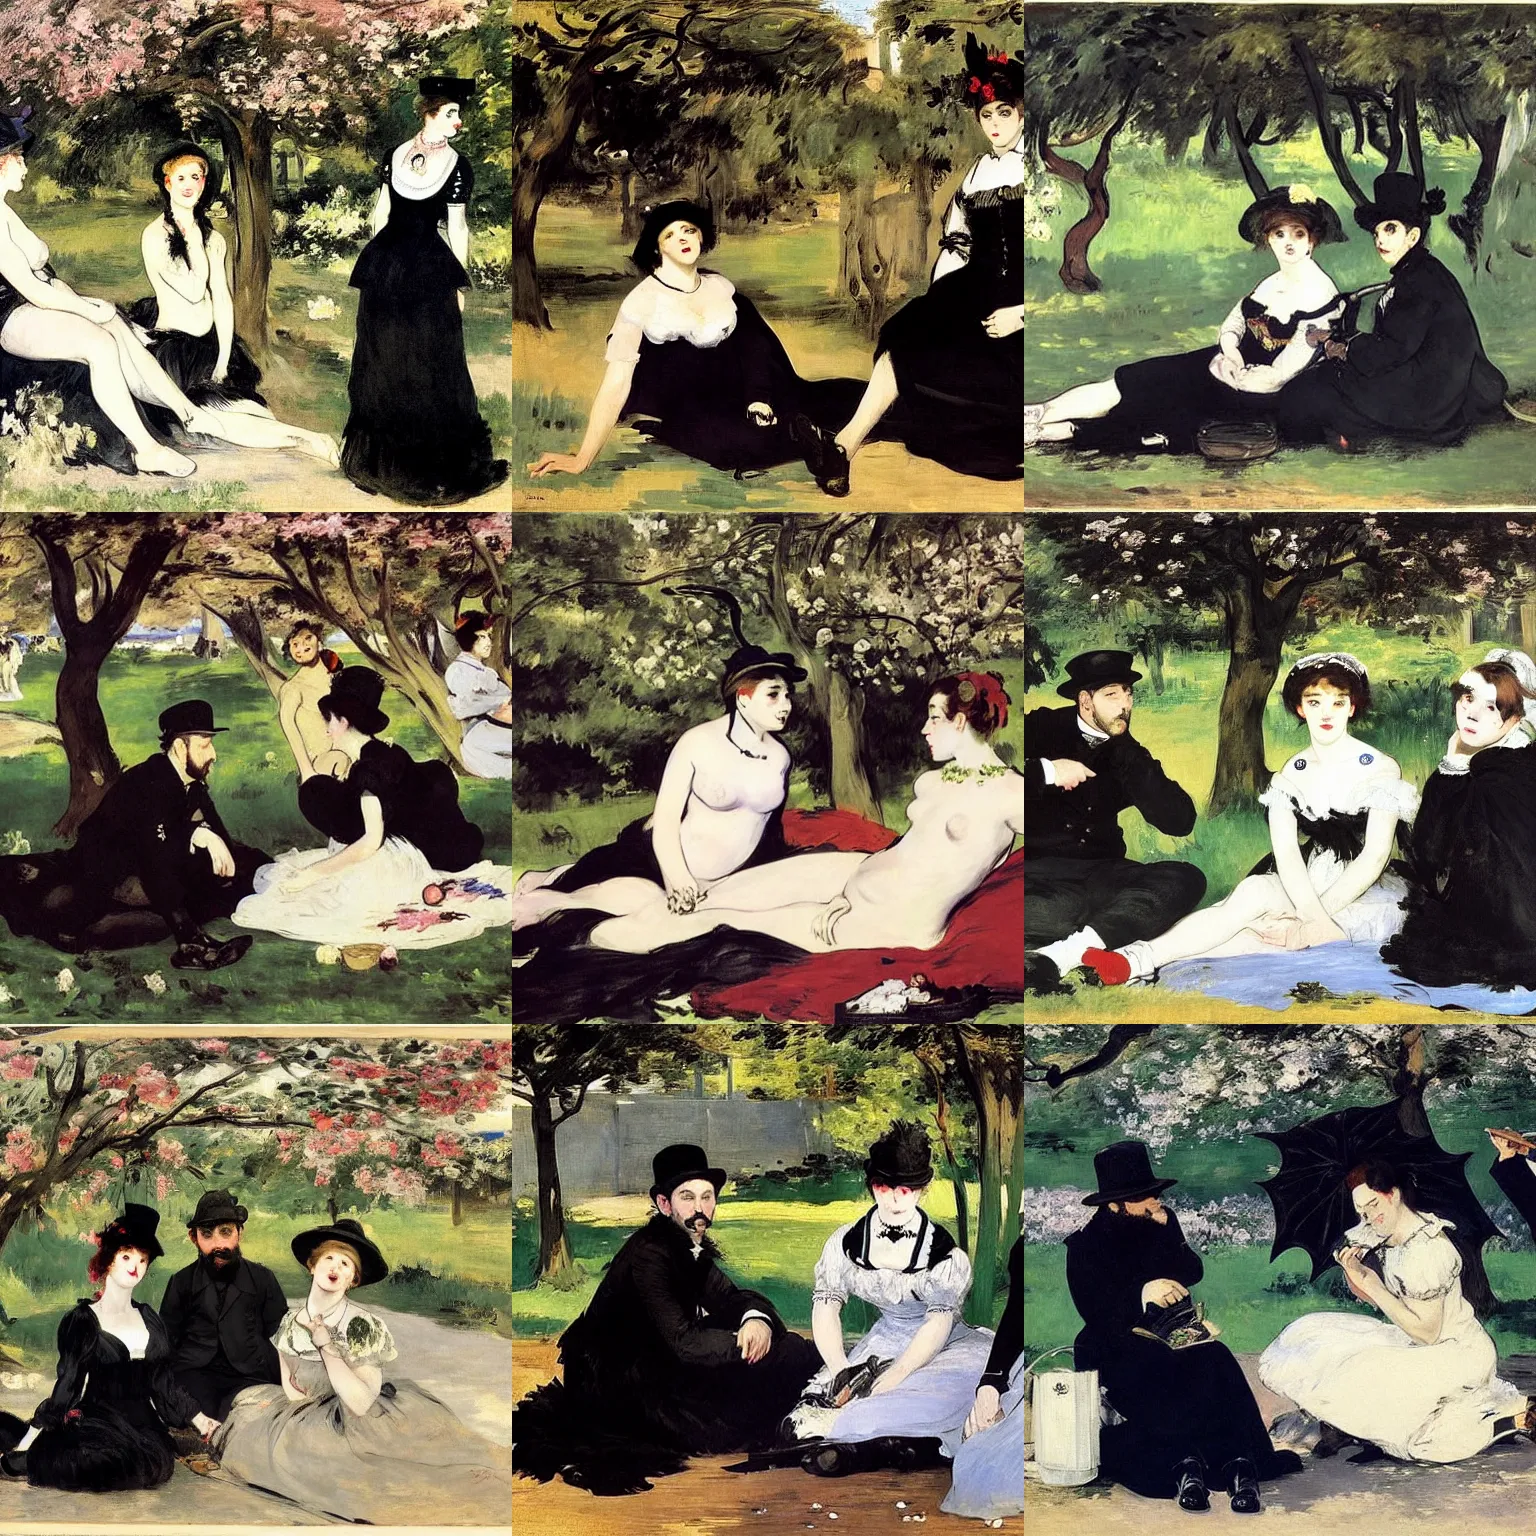 Prompt: hd art by edouard manet. three goths loitering in the shade, talking beneath a cherry tree outside a blockbuster video store.